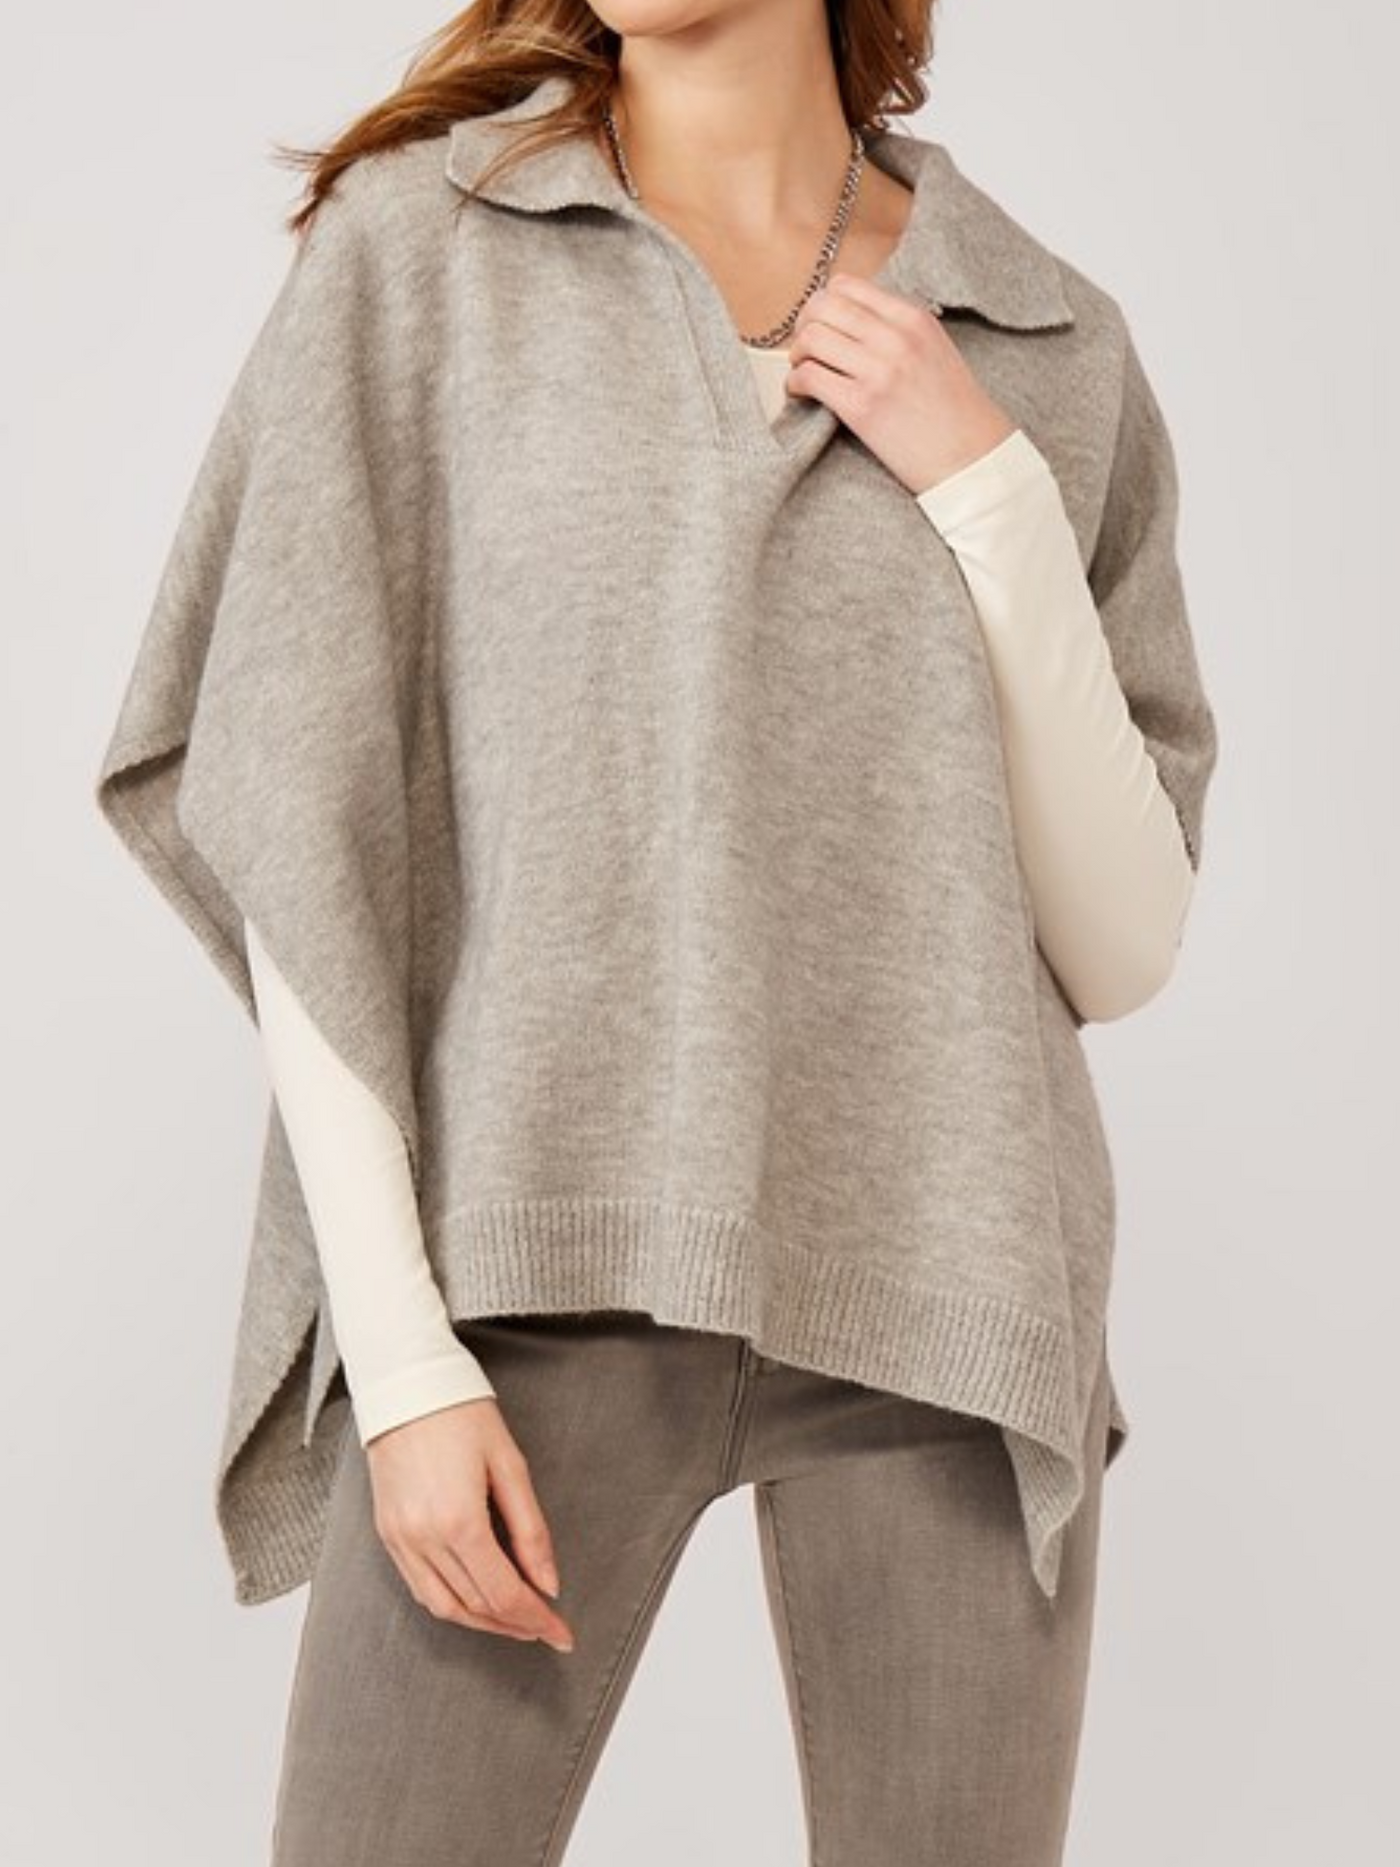 Shirt Collar Knit Poncho Blue grey front view.